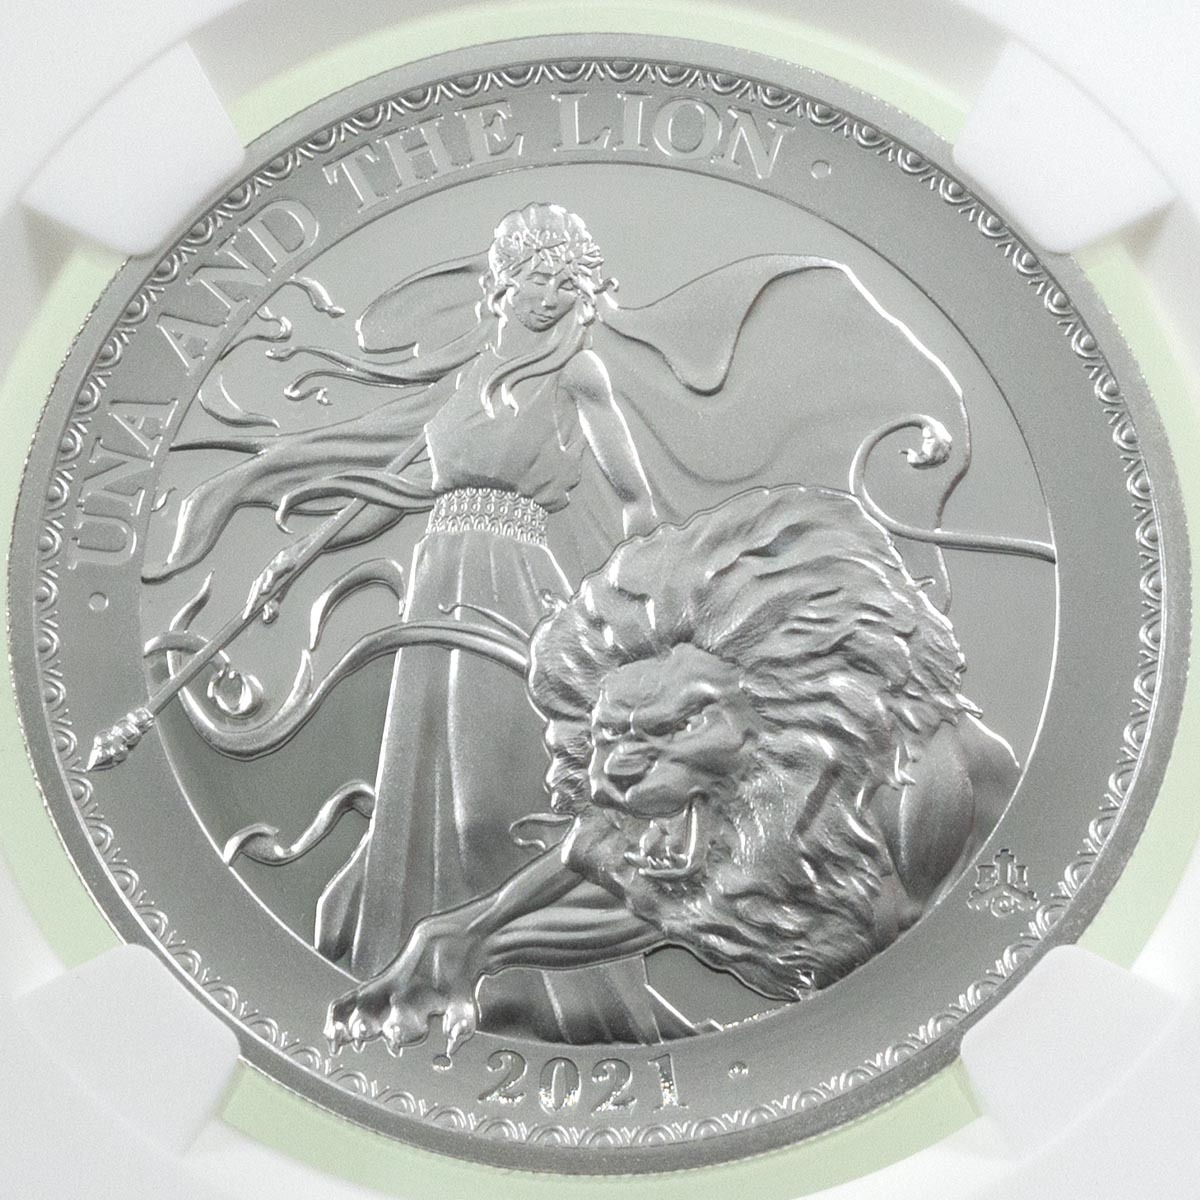 2021 St Helena Una And The Lion One Ounce Silver Proof Coin NGC Graded PF 70 Ultra Cameo Reverse